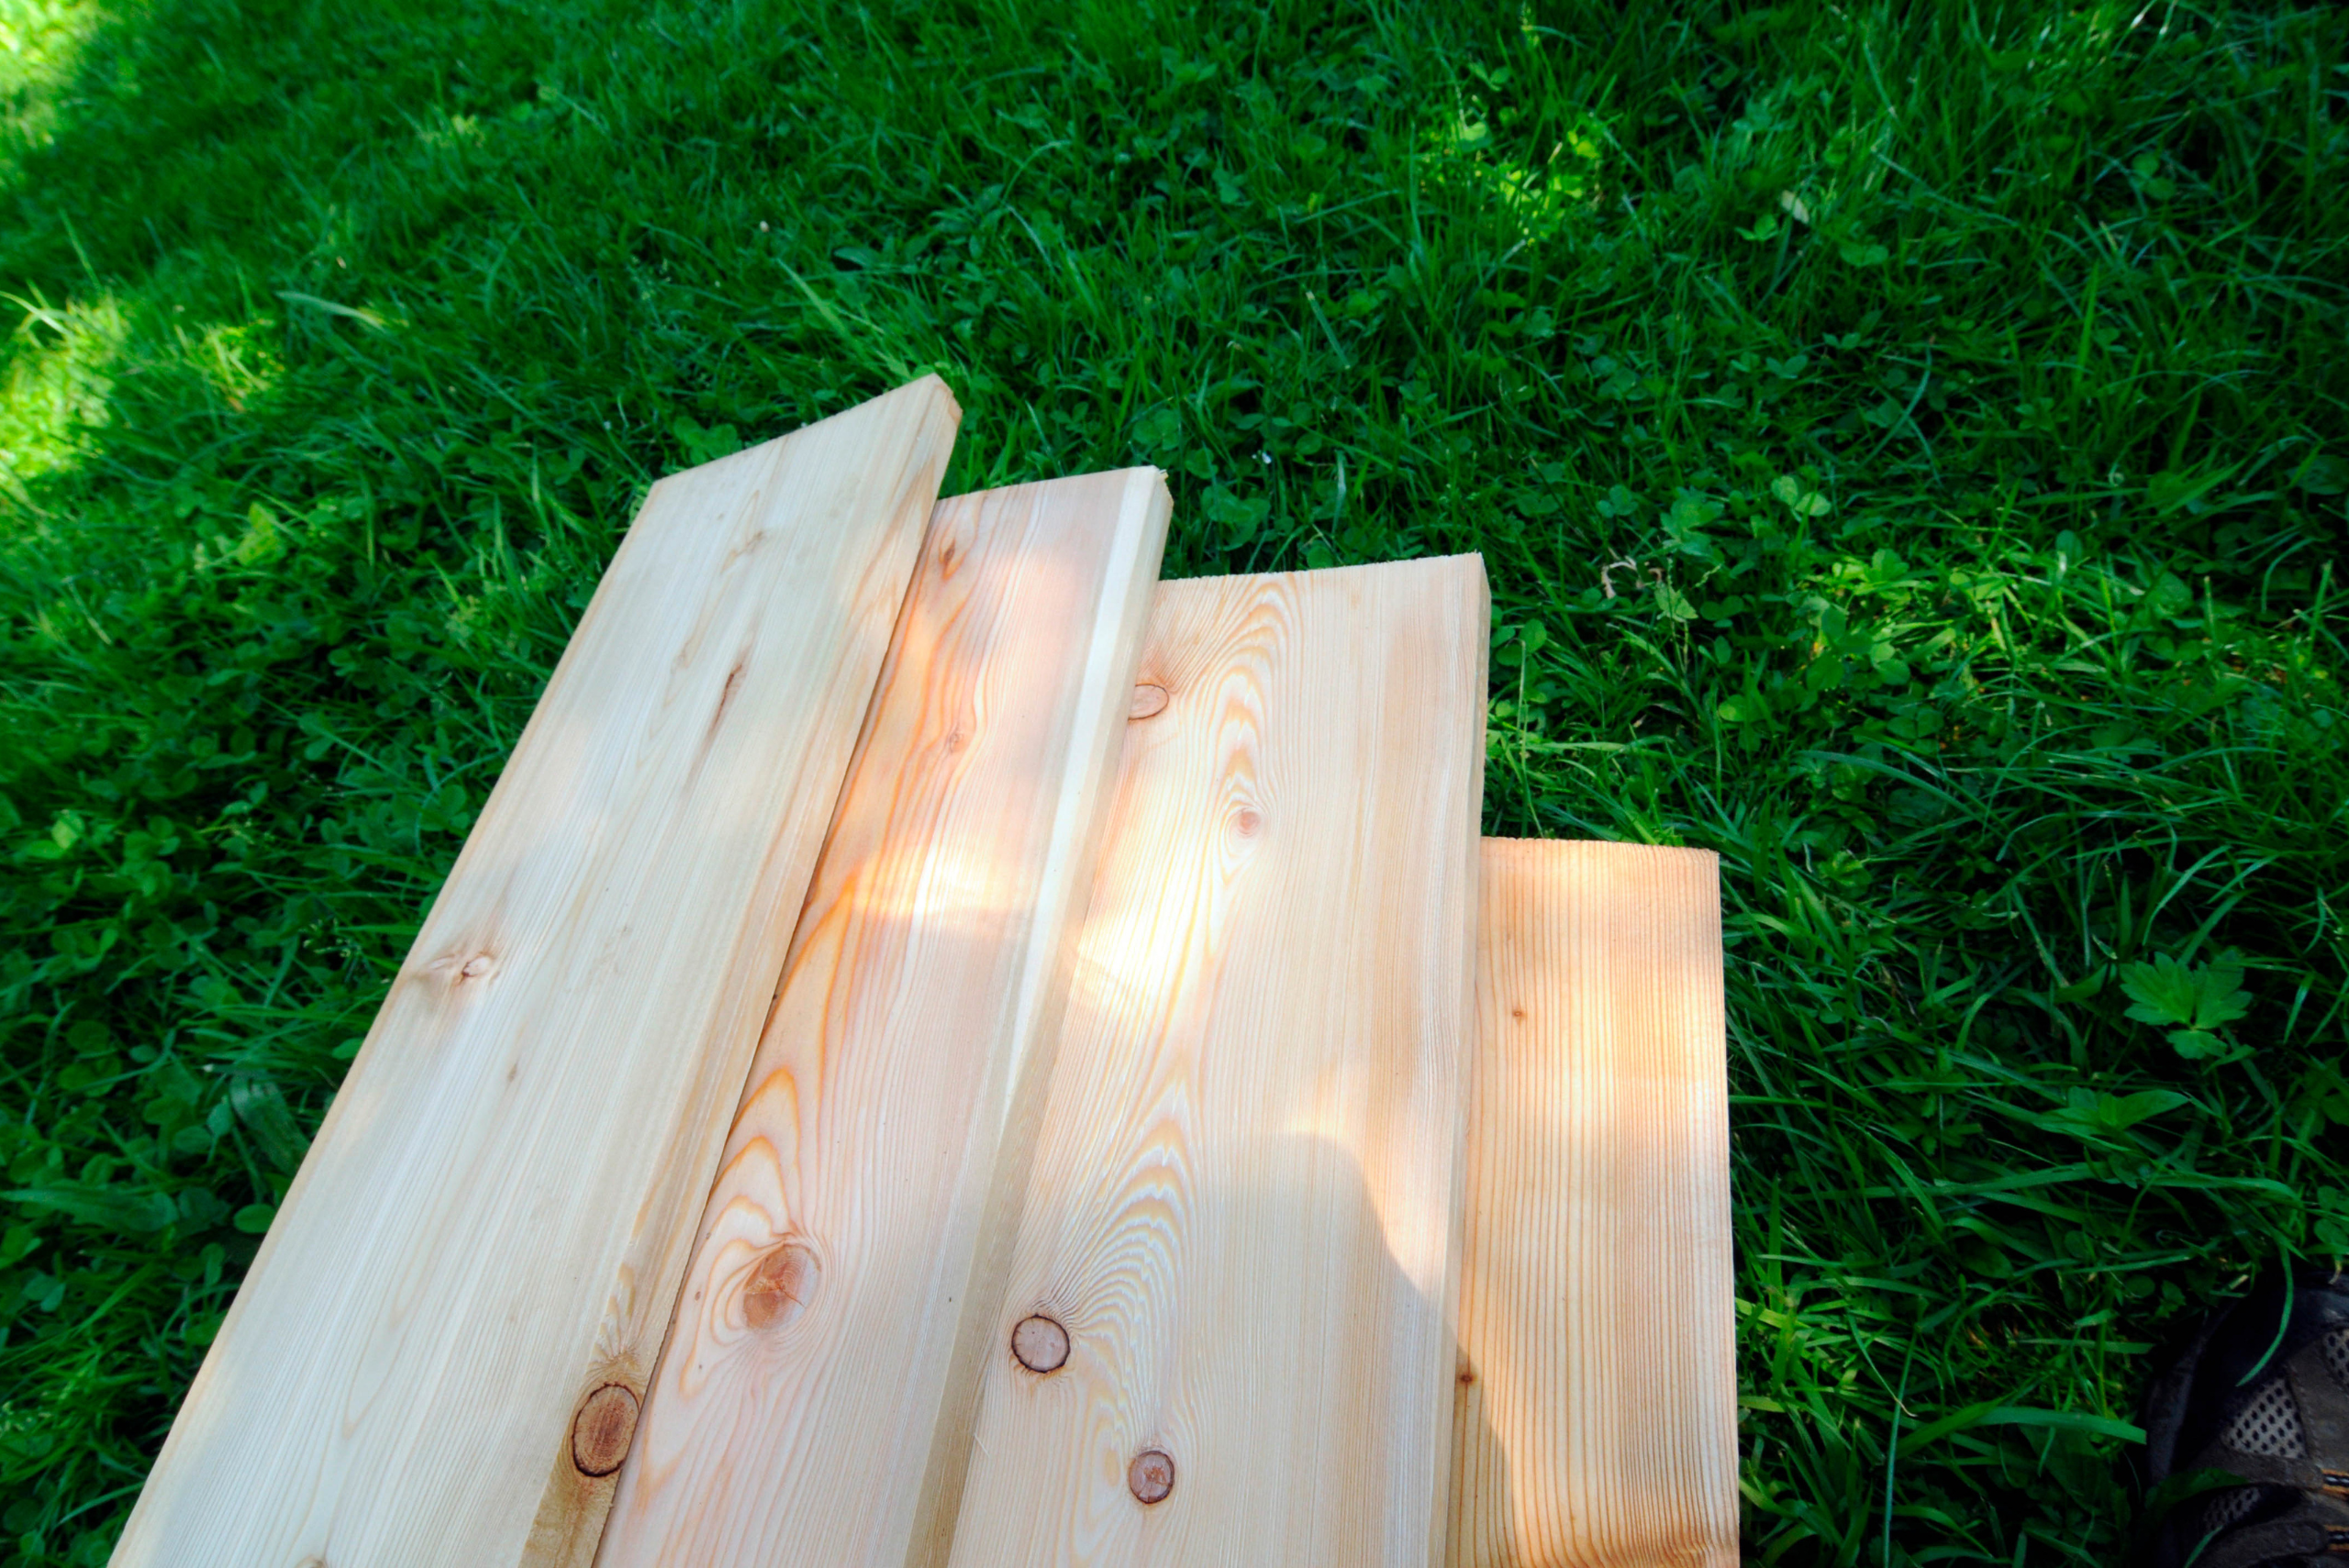 Wood boards on grass.